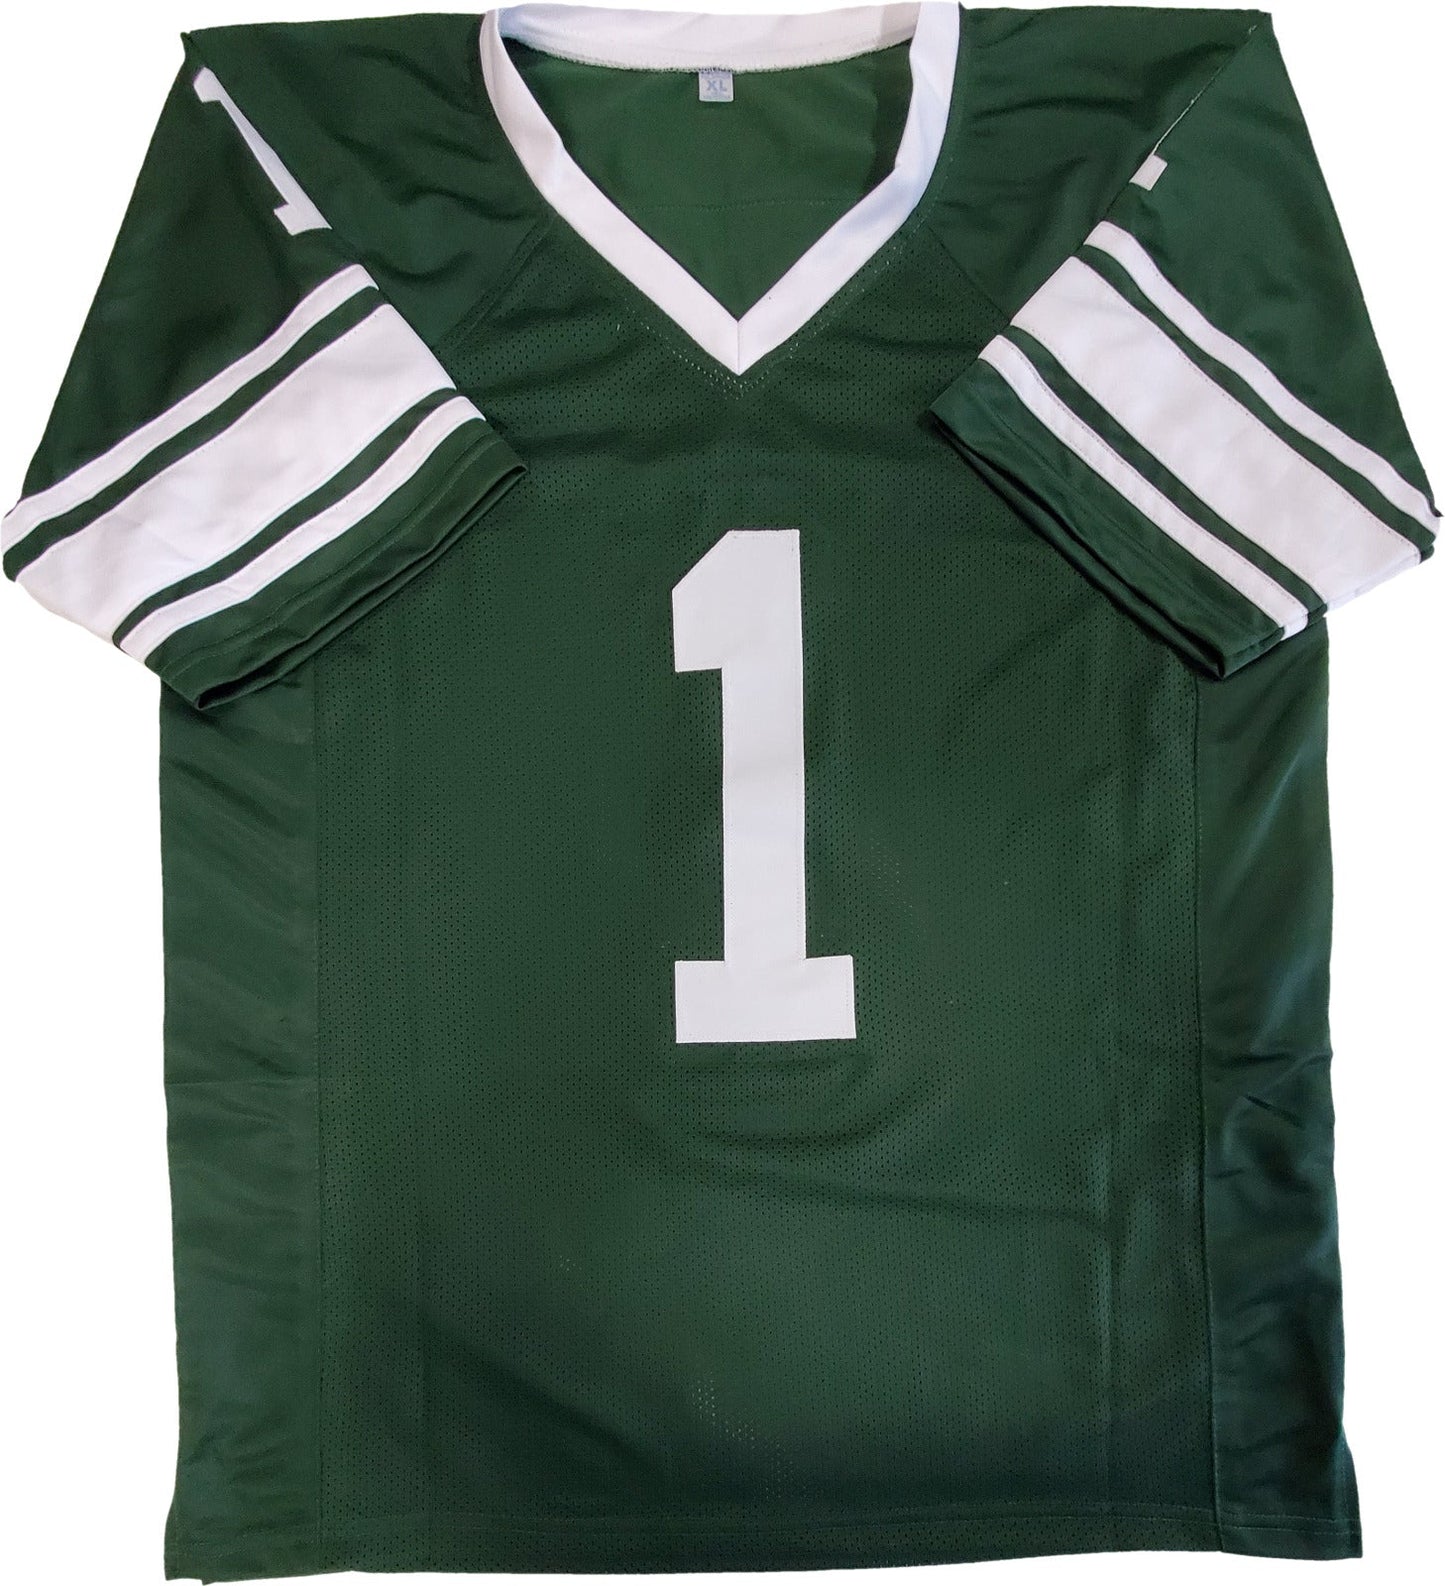 MVP Authentics Michigan State Spartans Andre Rison Autographed Signed Jersey Jsa Coa 98.10 sports jersey framing , jersey framing